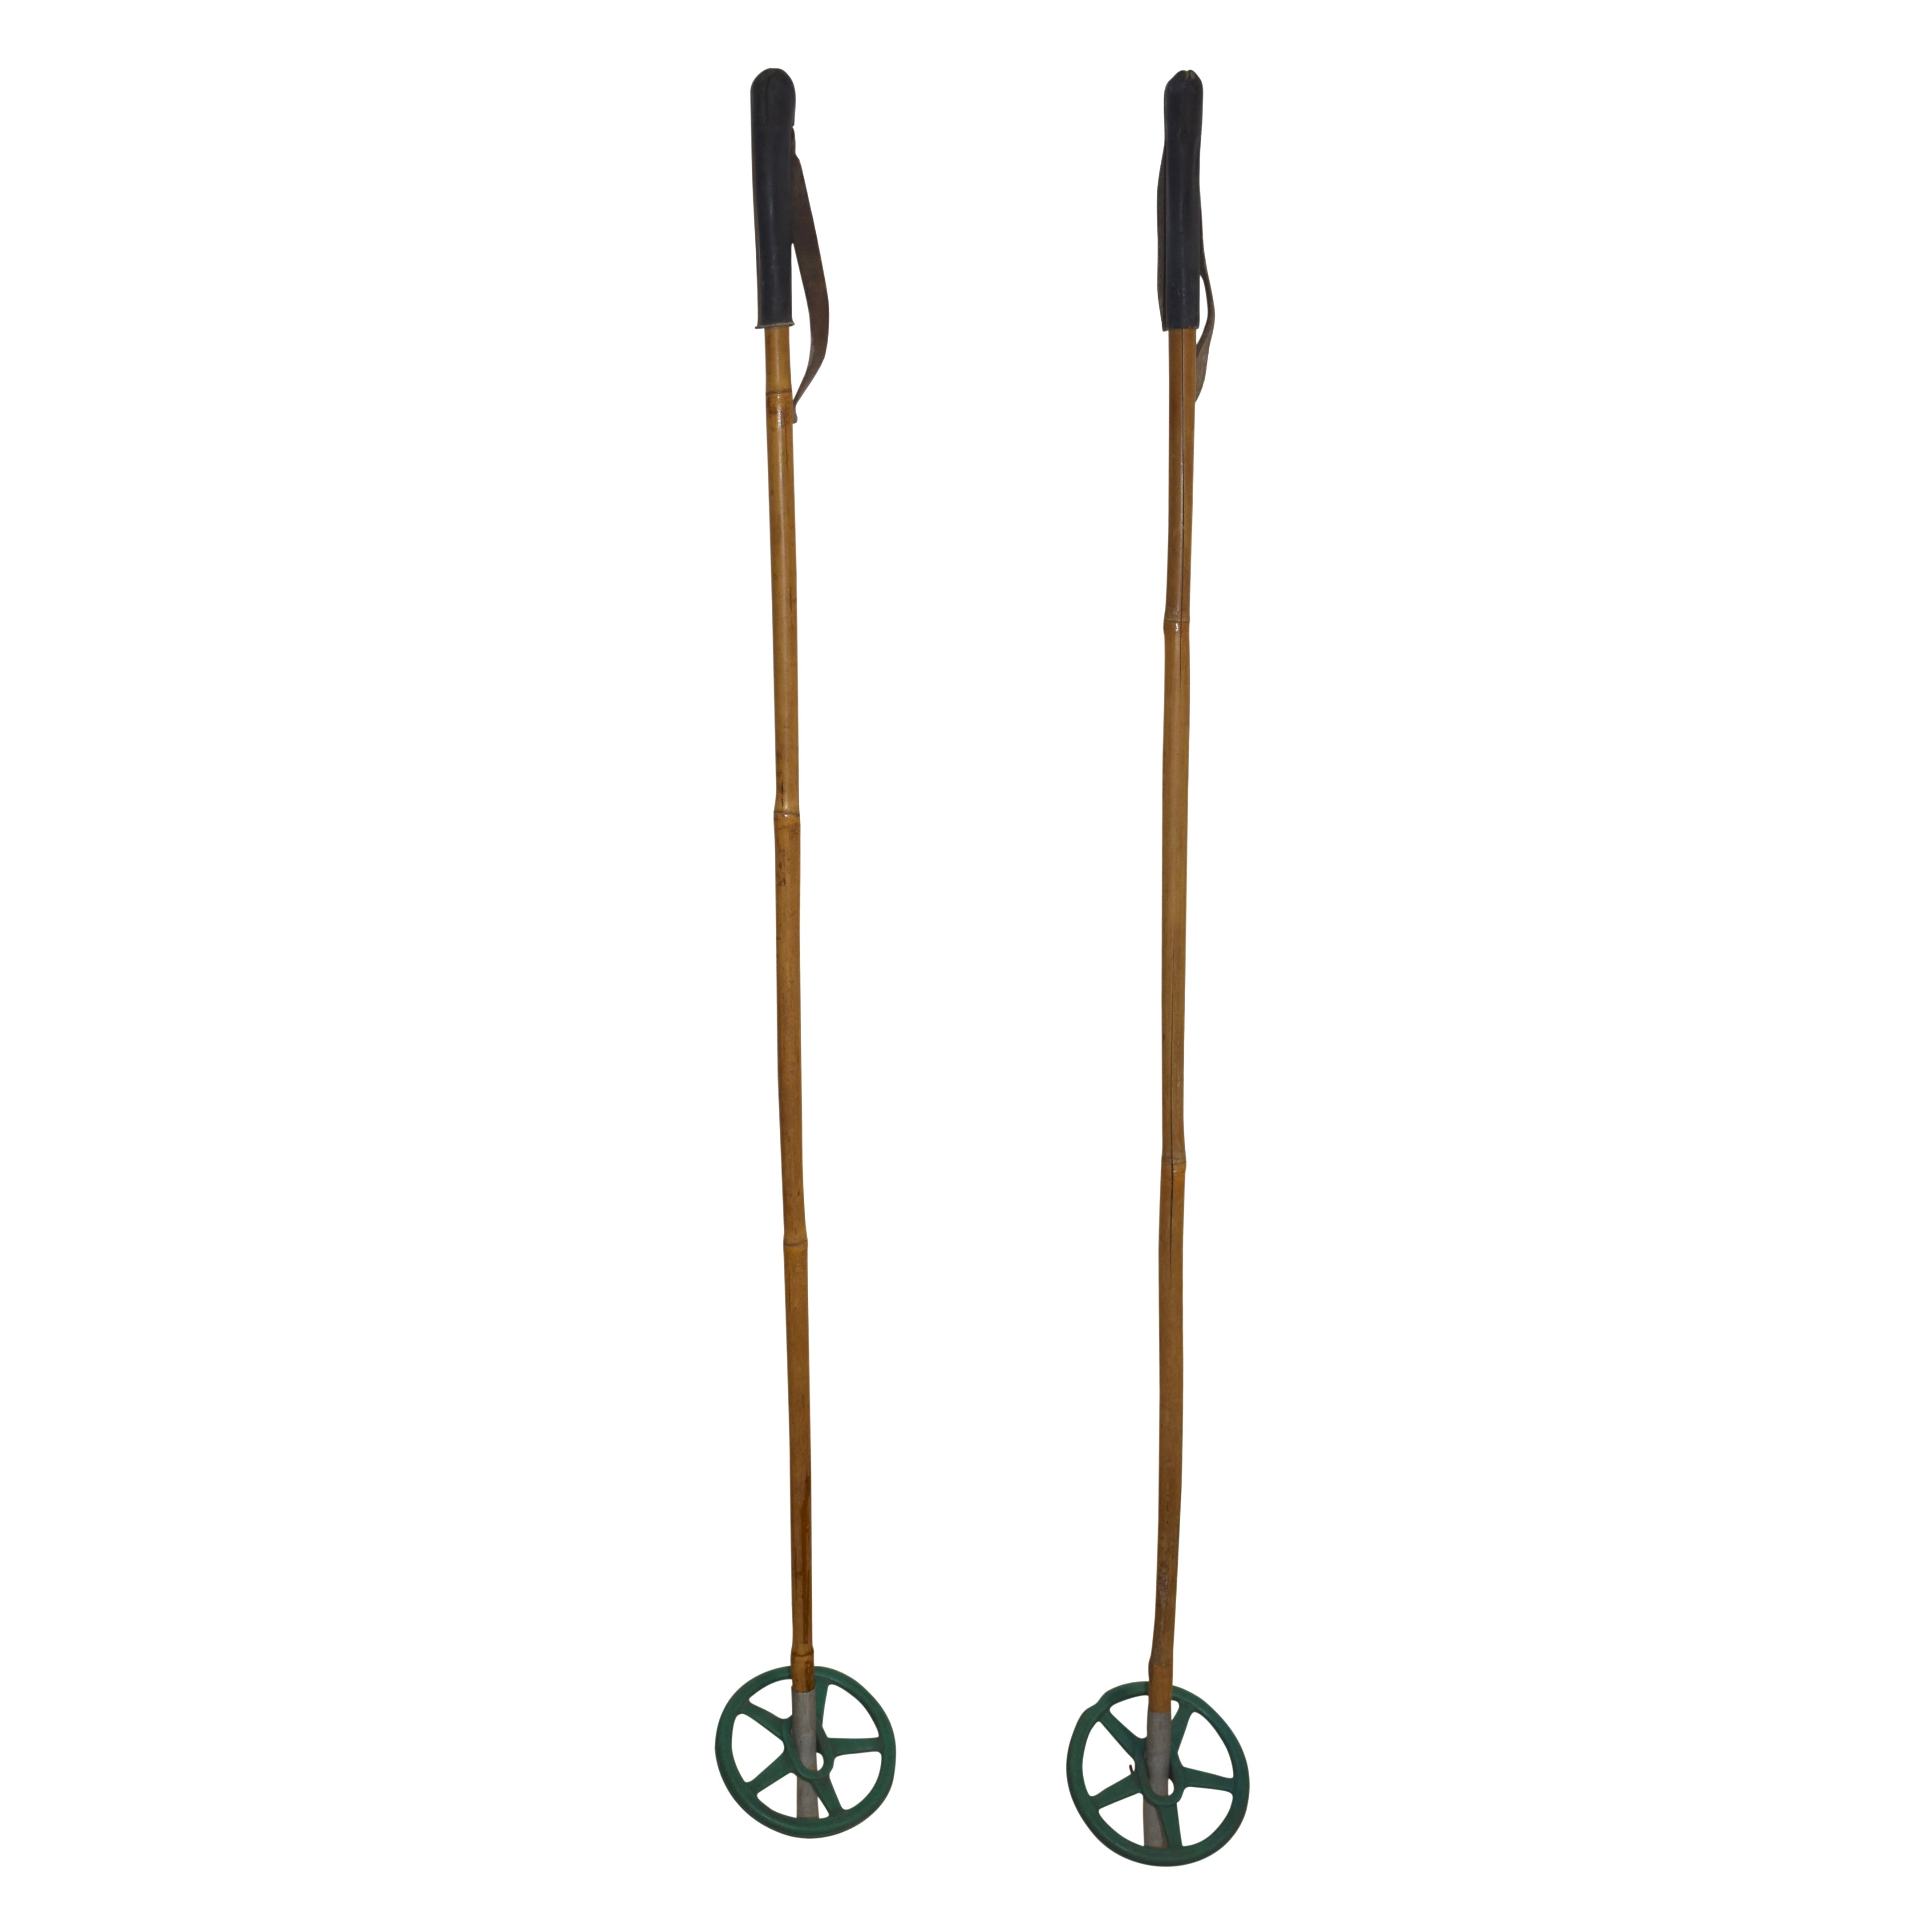 Bamboo Ski Poles with Green Plastic Baskets